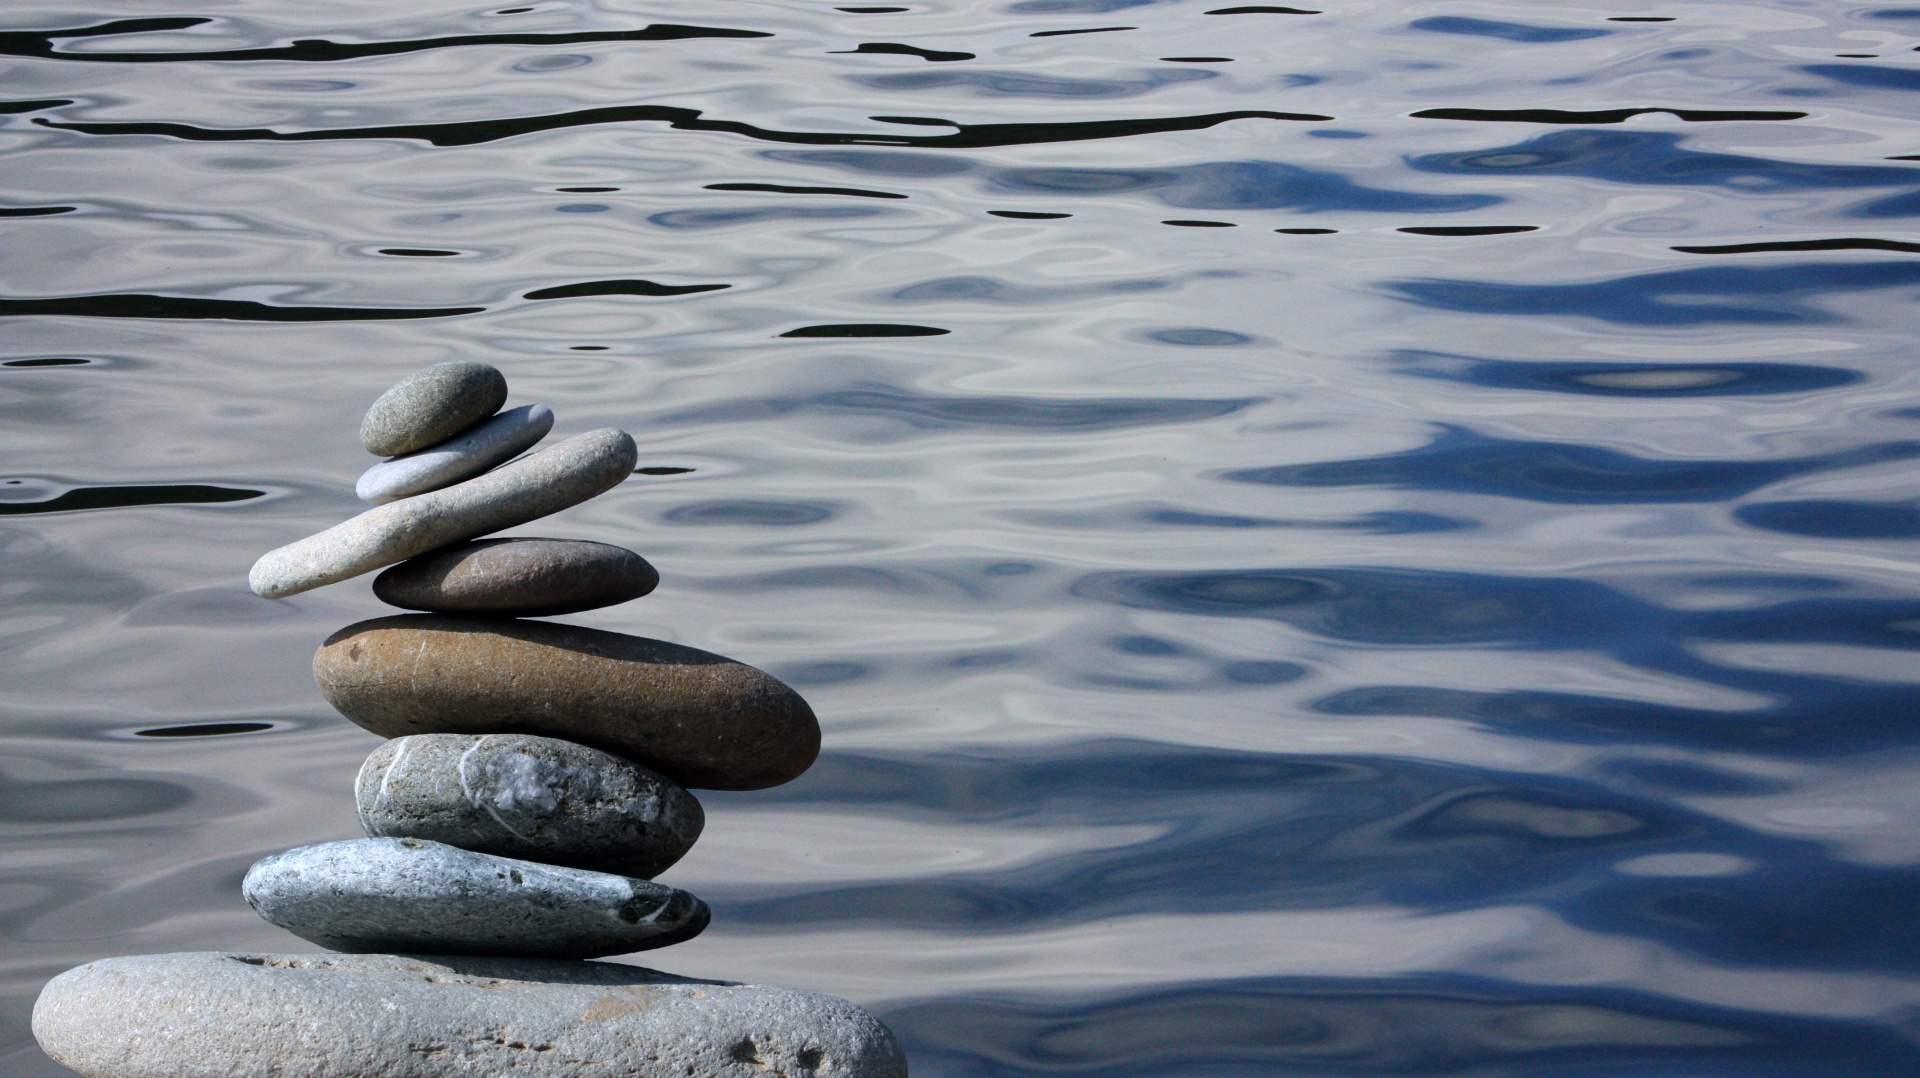 Zen Stones By Water Free Stock Photo - Public Domain Pictures